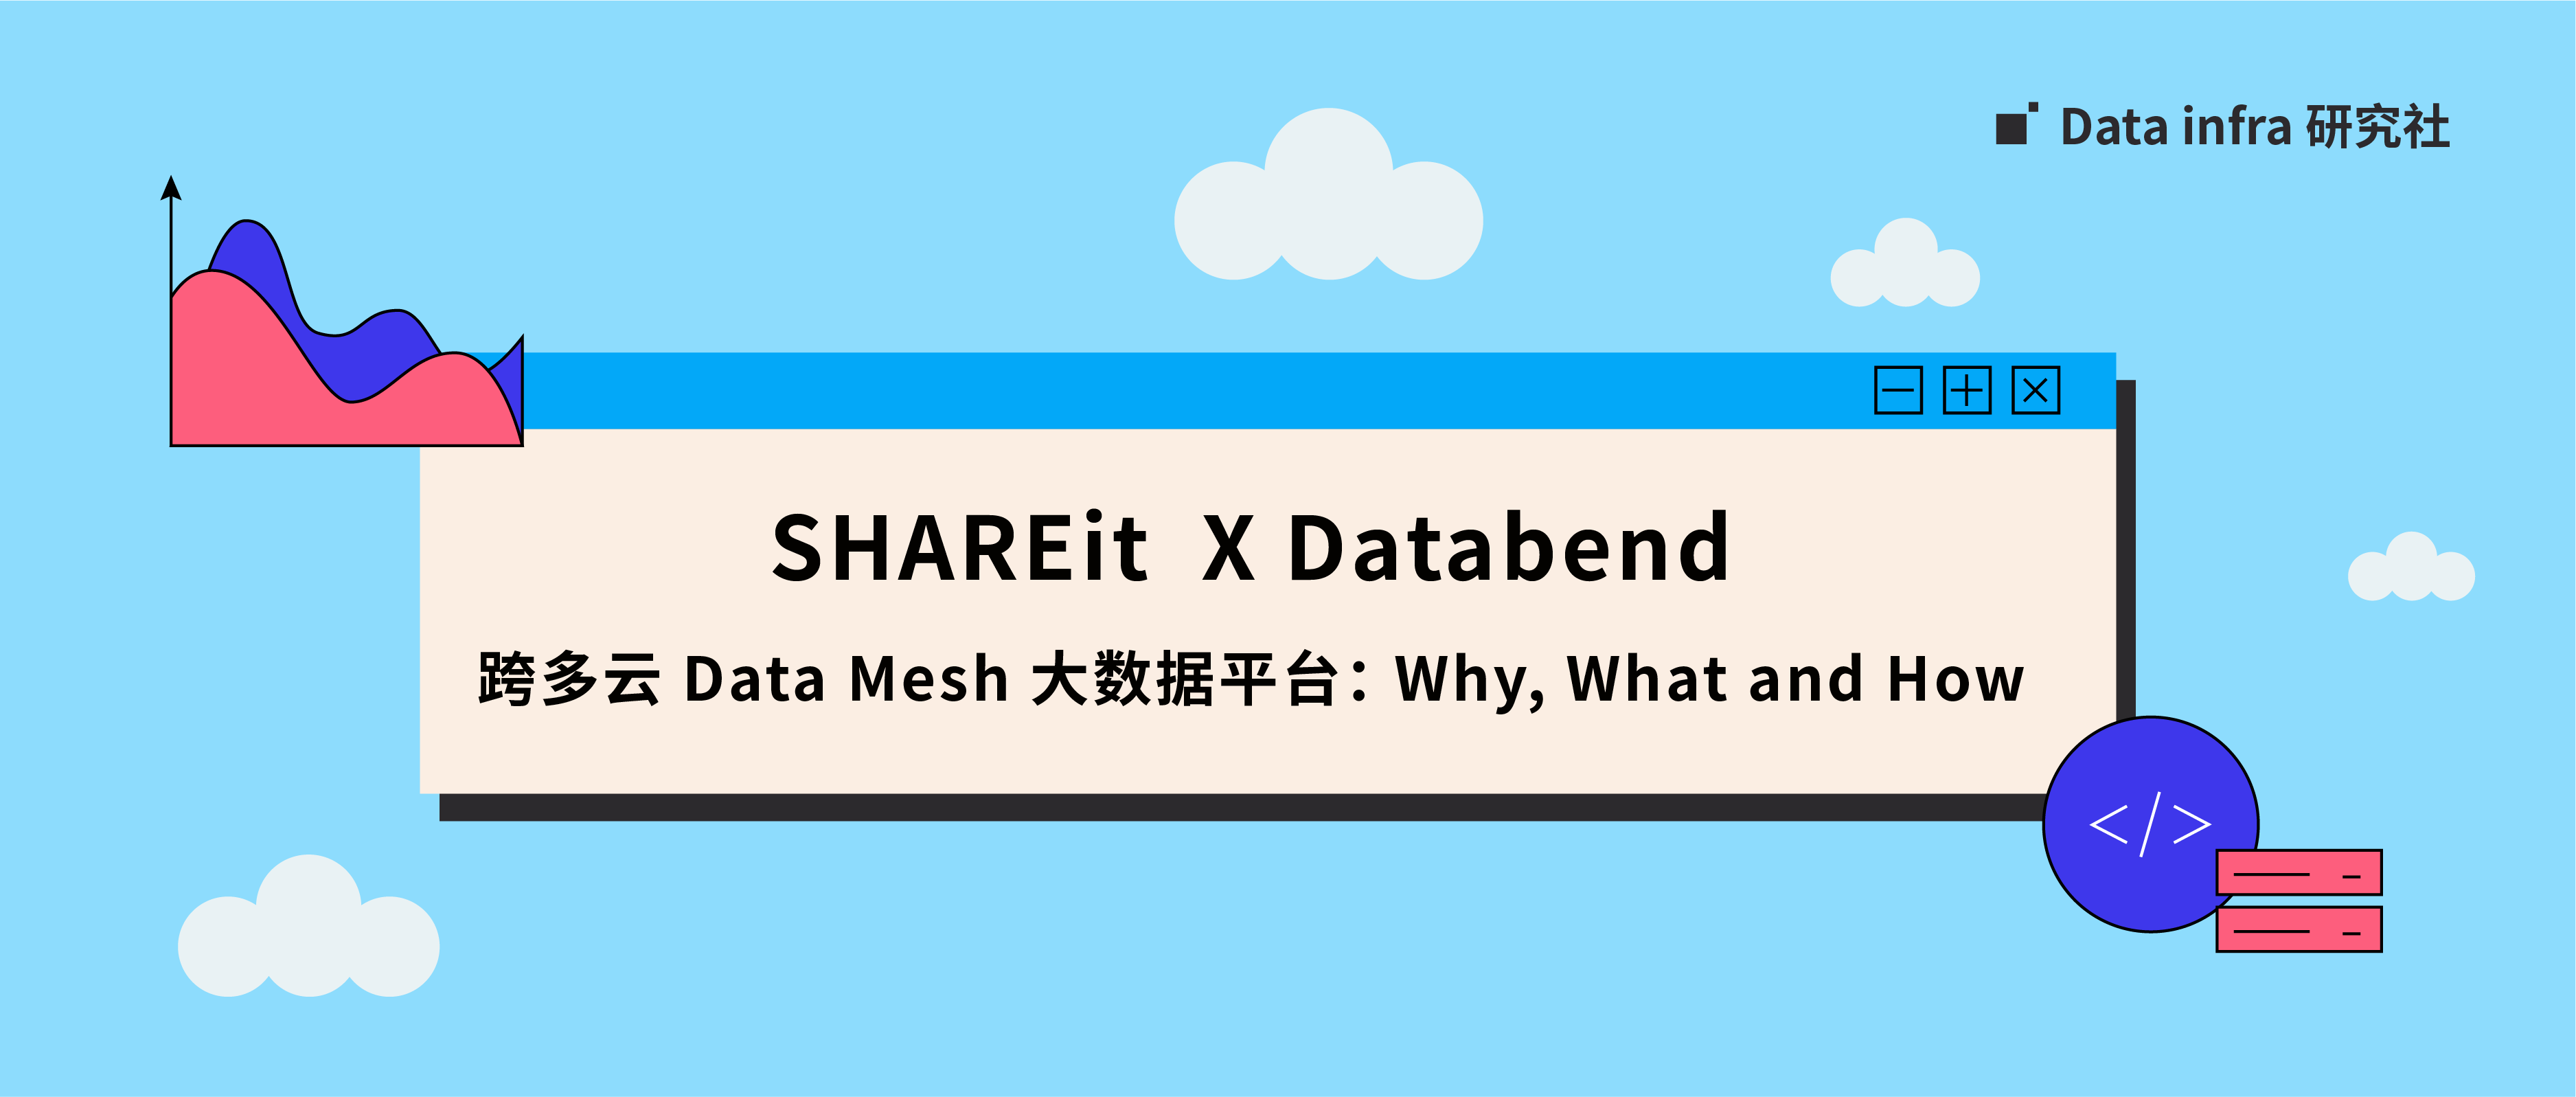 SHAREit X Databend | 跨多云 Data Mesh 大数据平台： Why, What and How